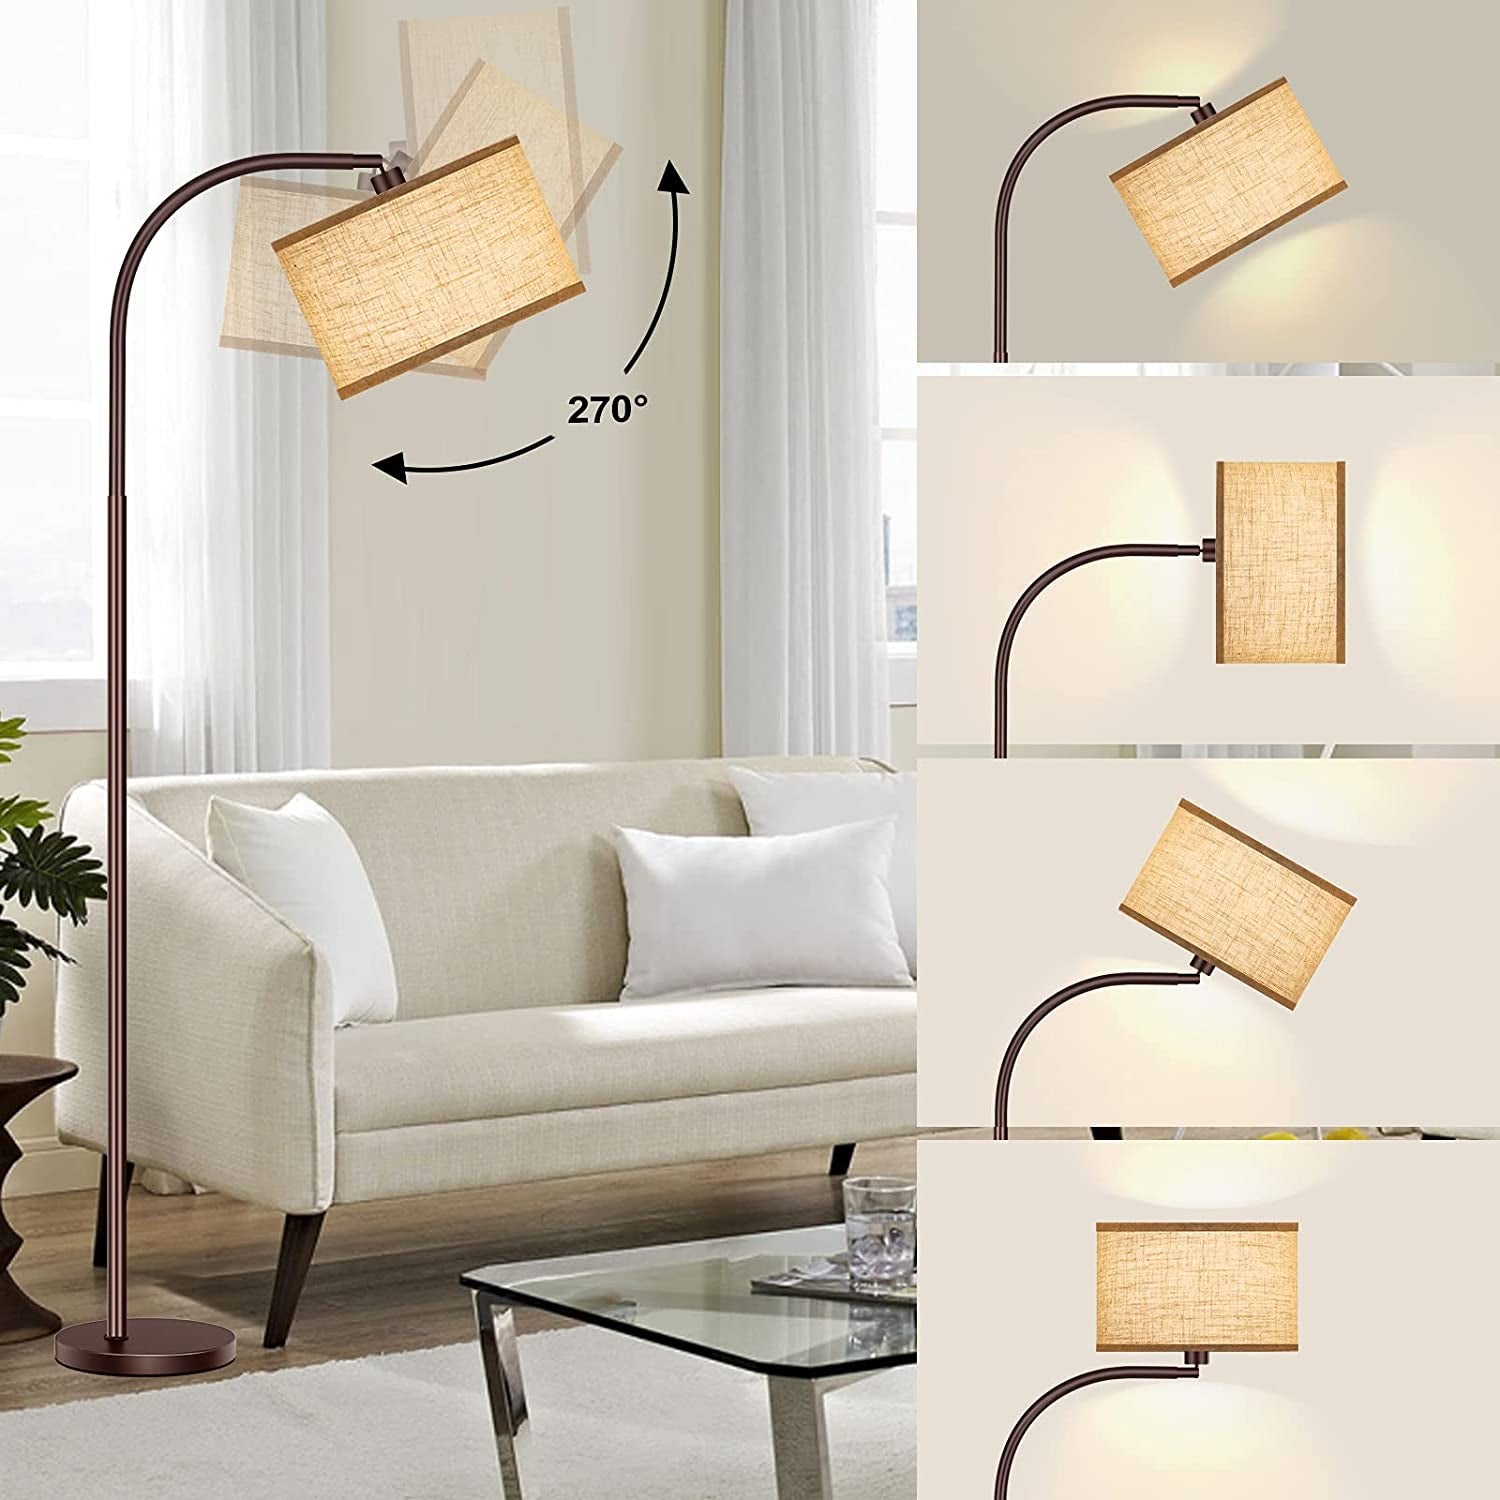 "Modern Adjustable Floor Lamp for Bedroom Study -  Floor Lamp with 2 Lamp Shades (Beige/White), Oil-Rubbed Bronze LED Standing Lamp, Classic Tall Reading Pole Lamp with LED Bulb for Living Room"